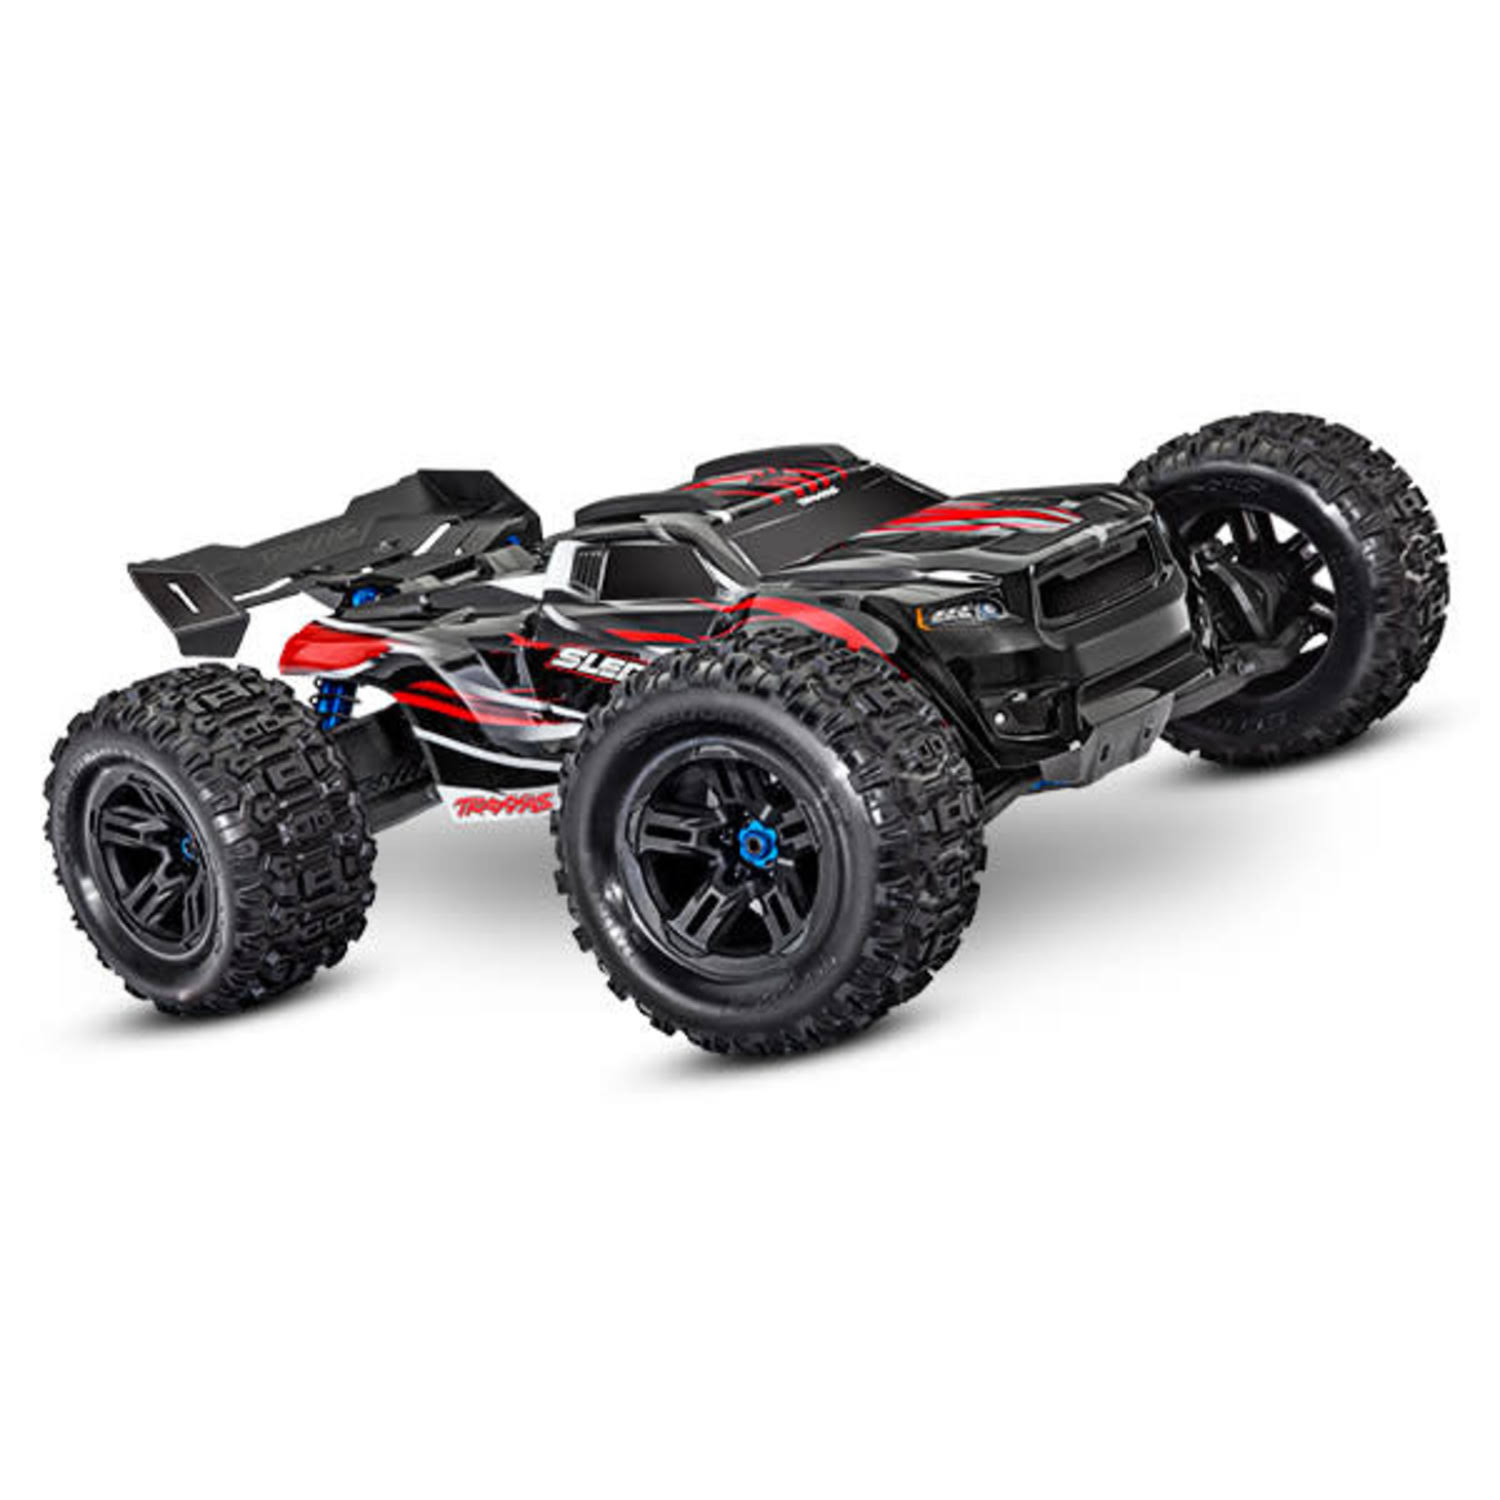 Traxxas Sledge 6s 1/8 4WD RC Monster Truck (Red) 95076-4